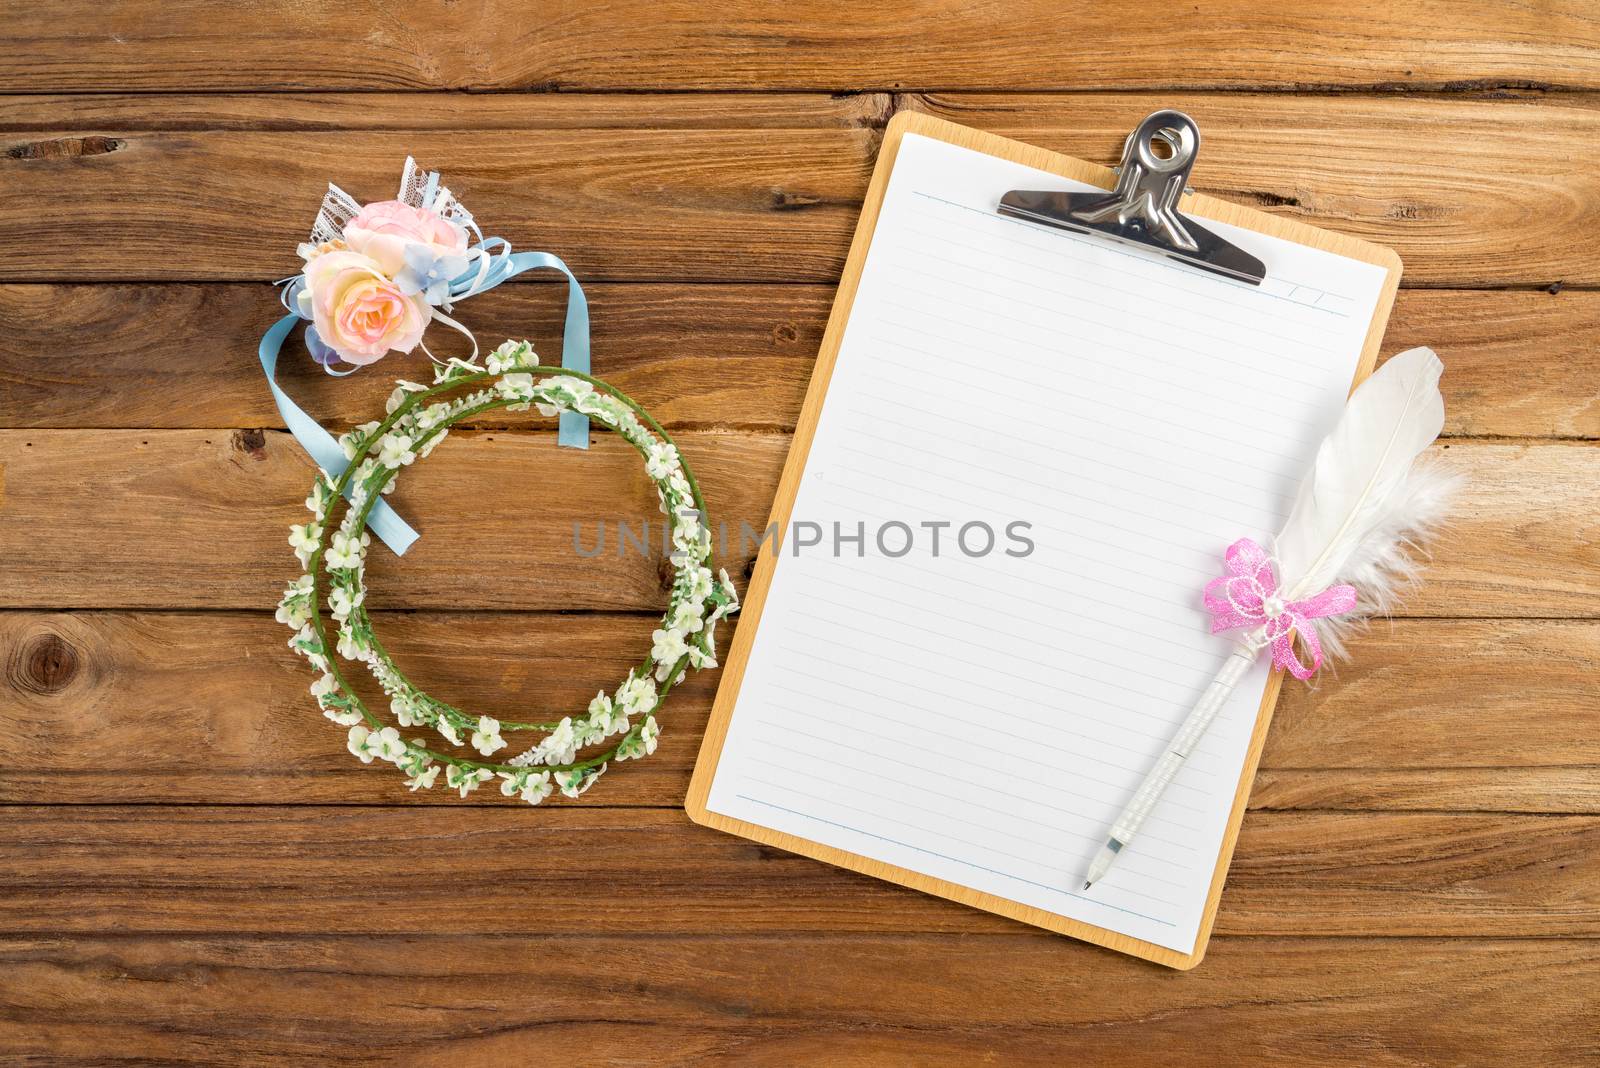 Wooden Clipboard attach planning paper with pen on top beside rose headband, tiara for bridesmaids